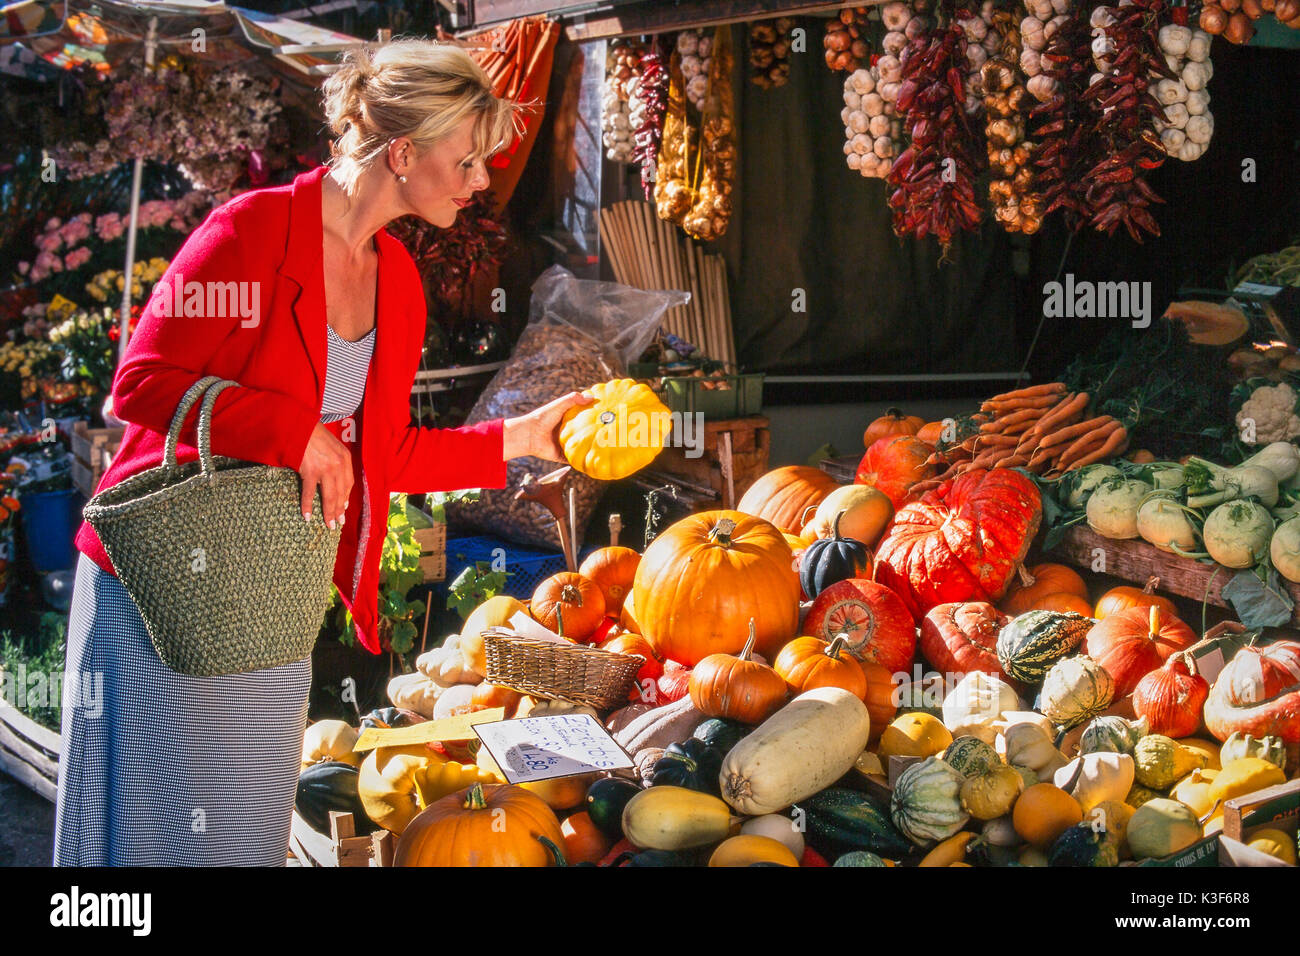 Young Woman while shopping at the town market looks at pumpkins Stock Photo